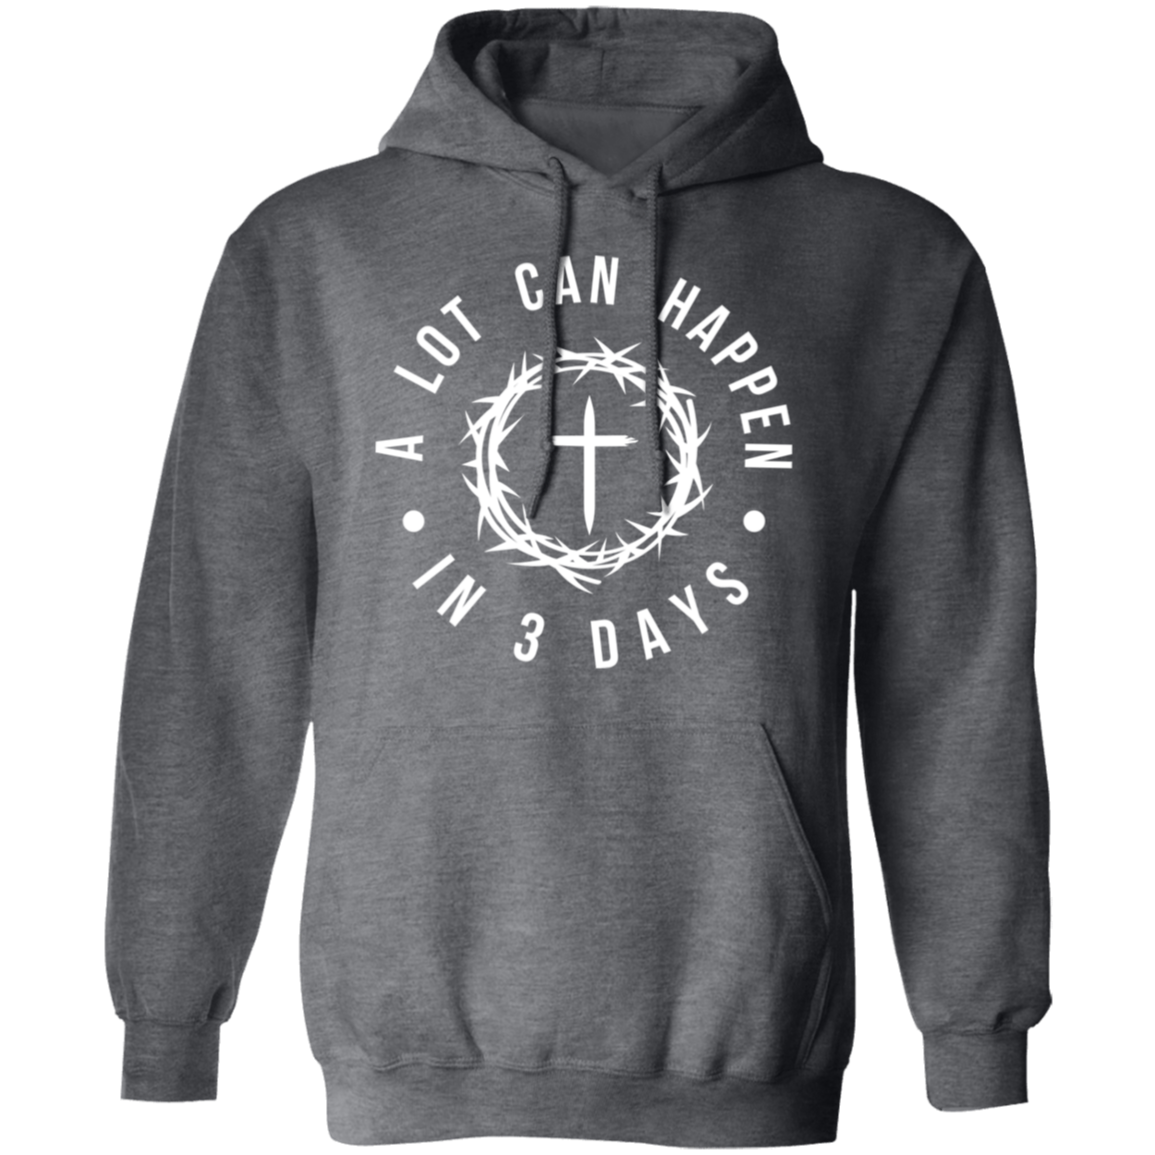 A lot can happen in 3 Days, Resurrection, Jesus, Savior, Faith - Unisex Pullover Hoodie